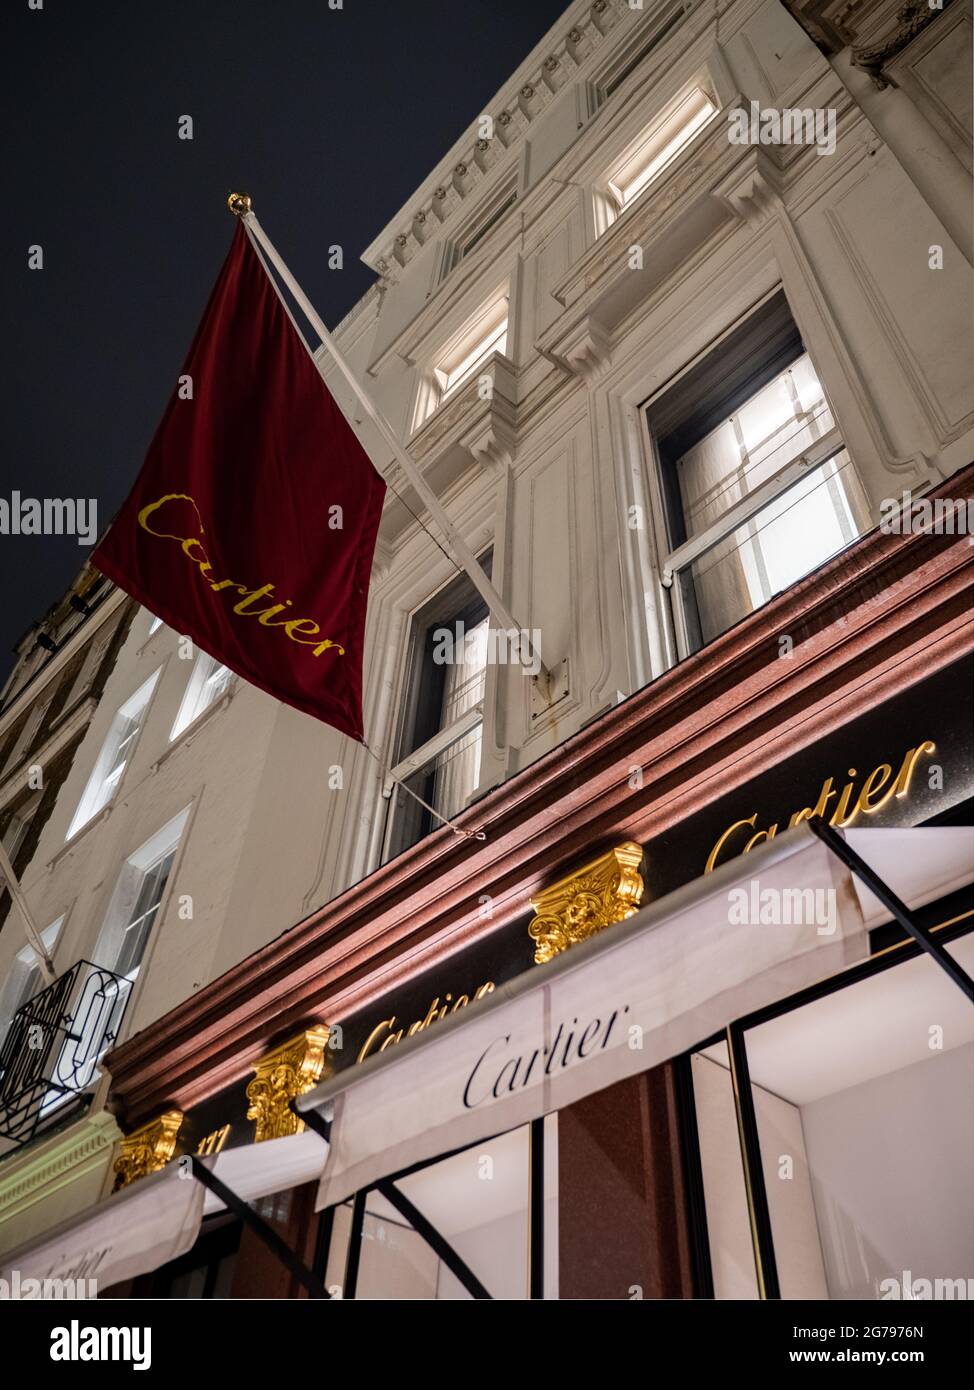 Cartier, Bond Street, London. A jewellery store shop front in London's most select retail district near Piccadilly and Mayfair. Stock Photo